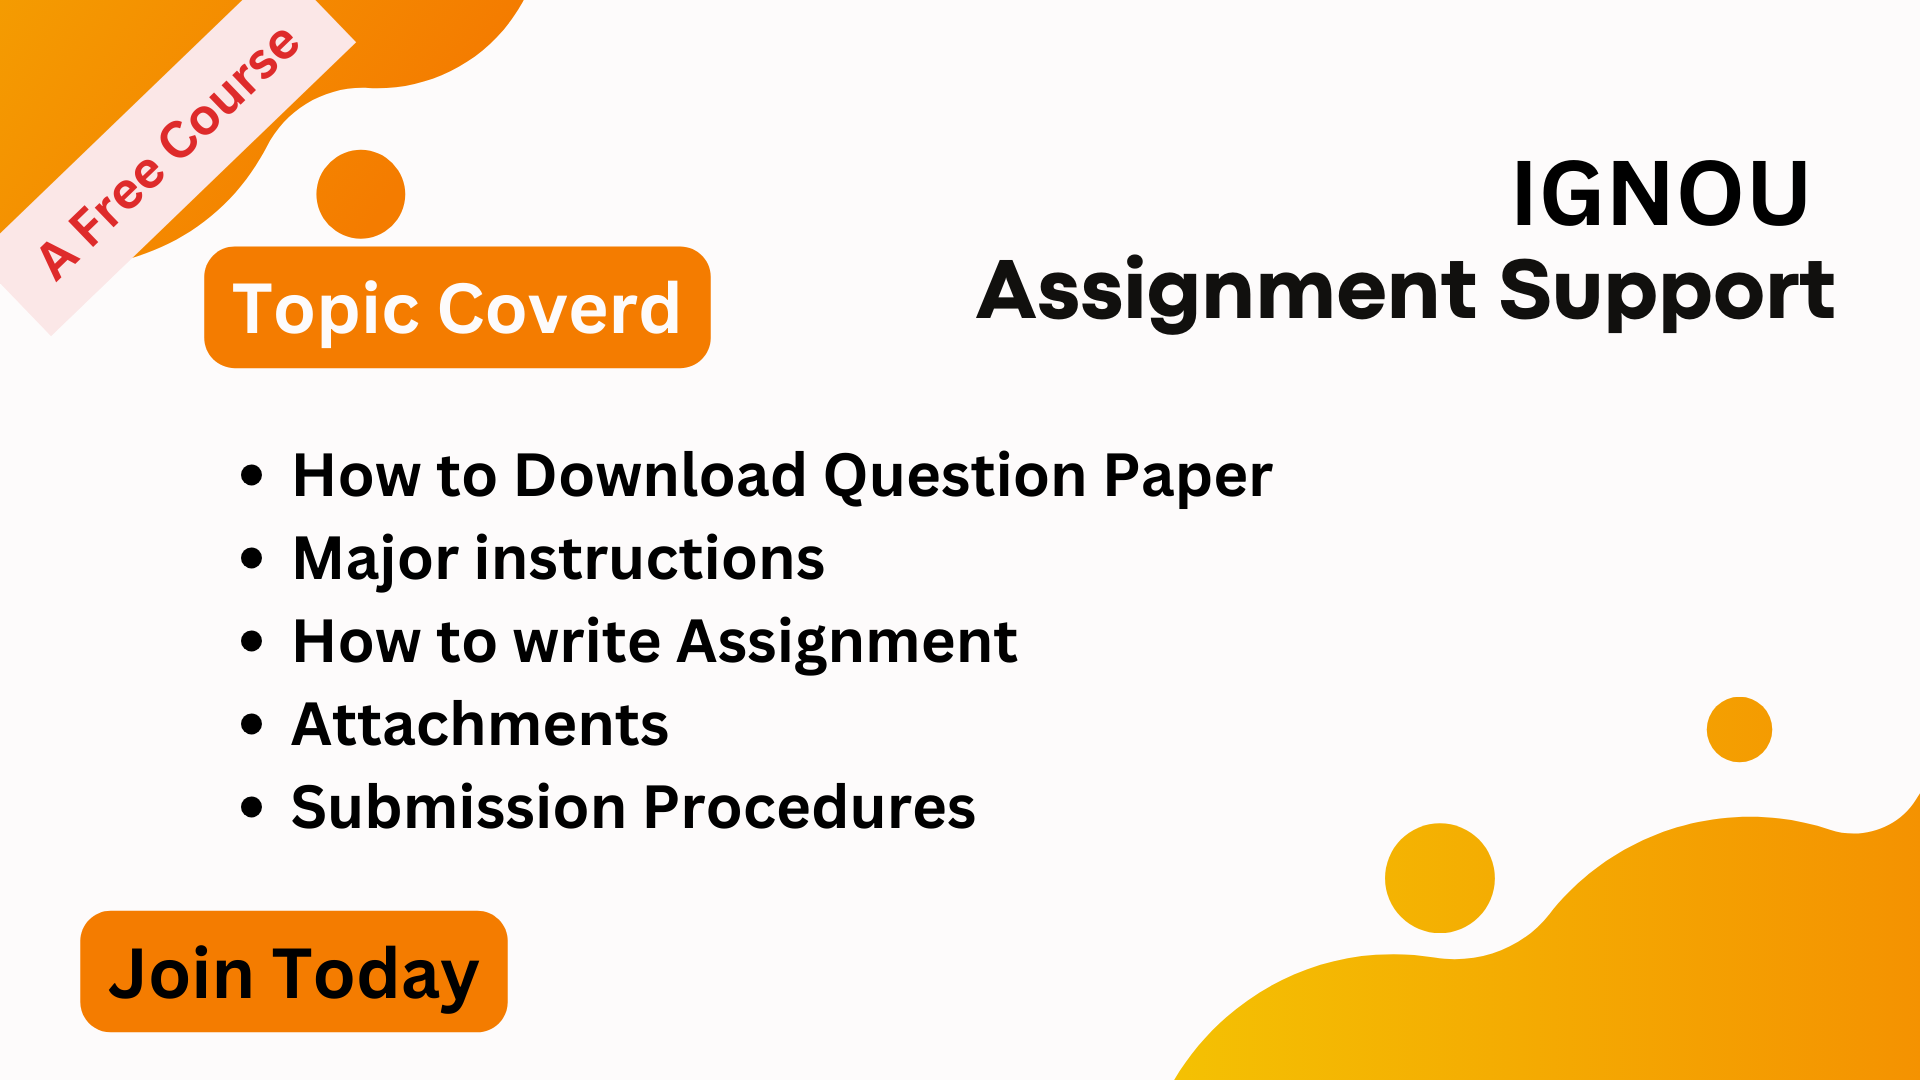 IGNOU Assignment Support